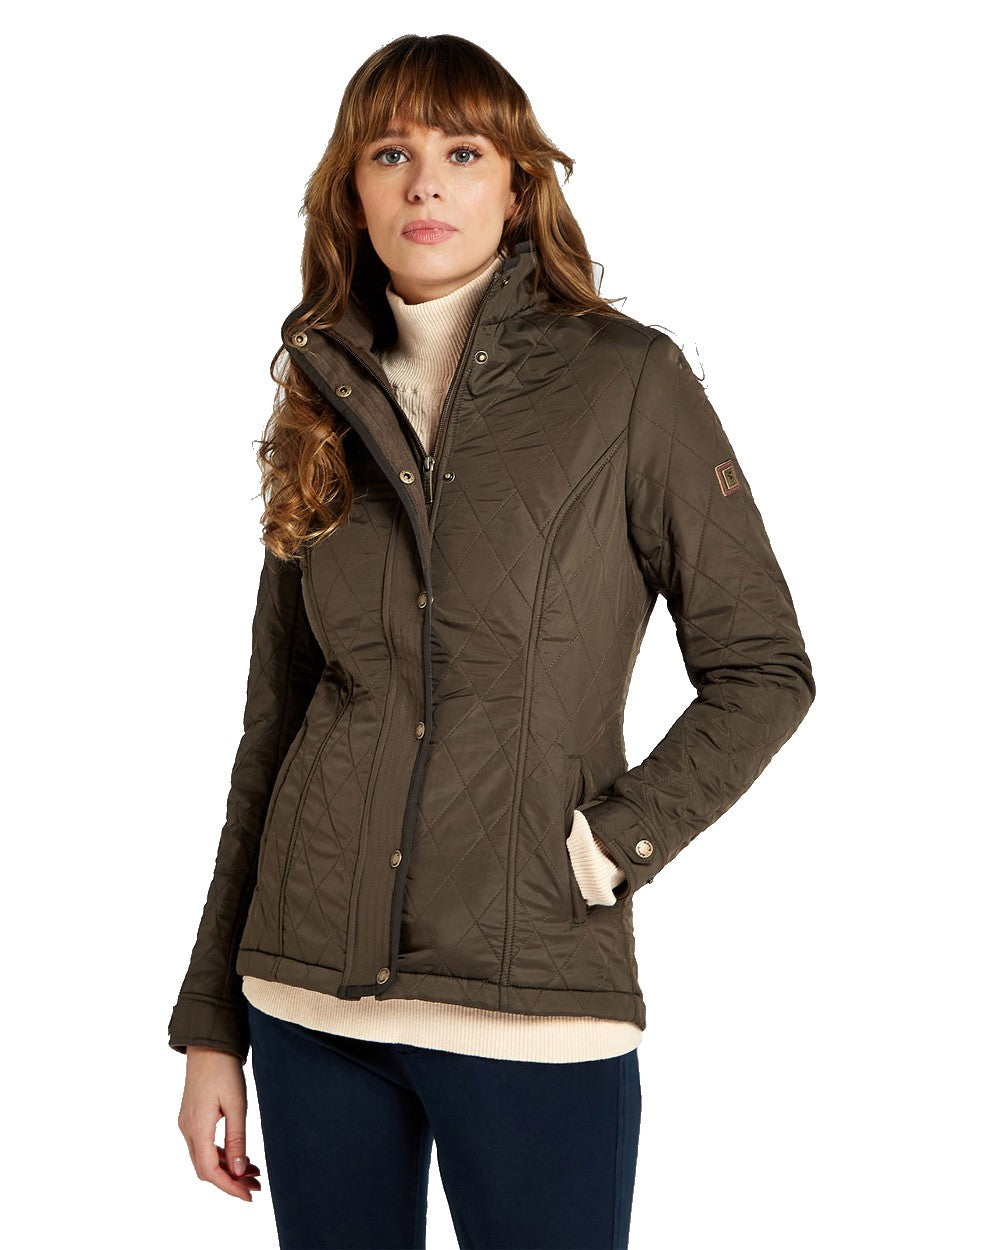 Dubarry Camlodge Quilted Jacket in Olive 